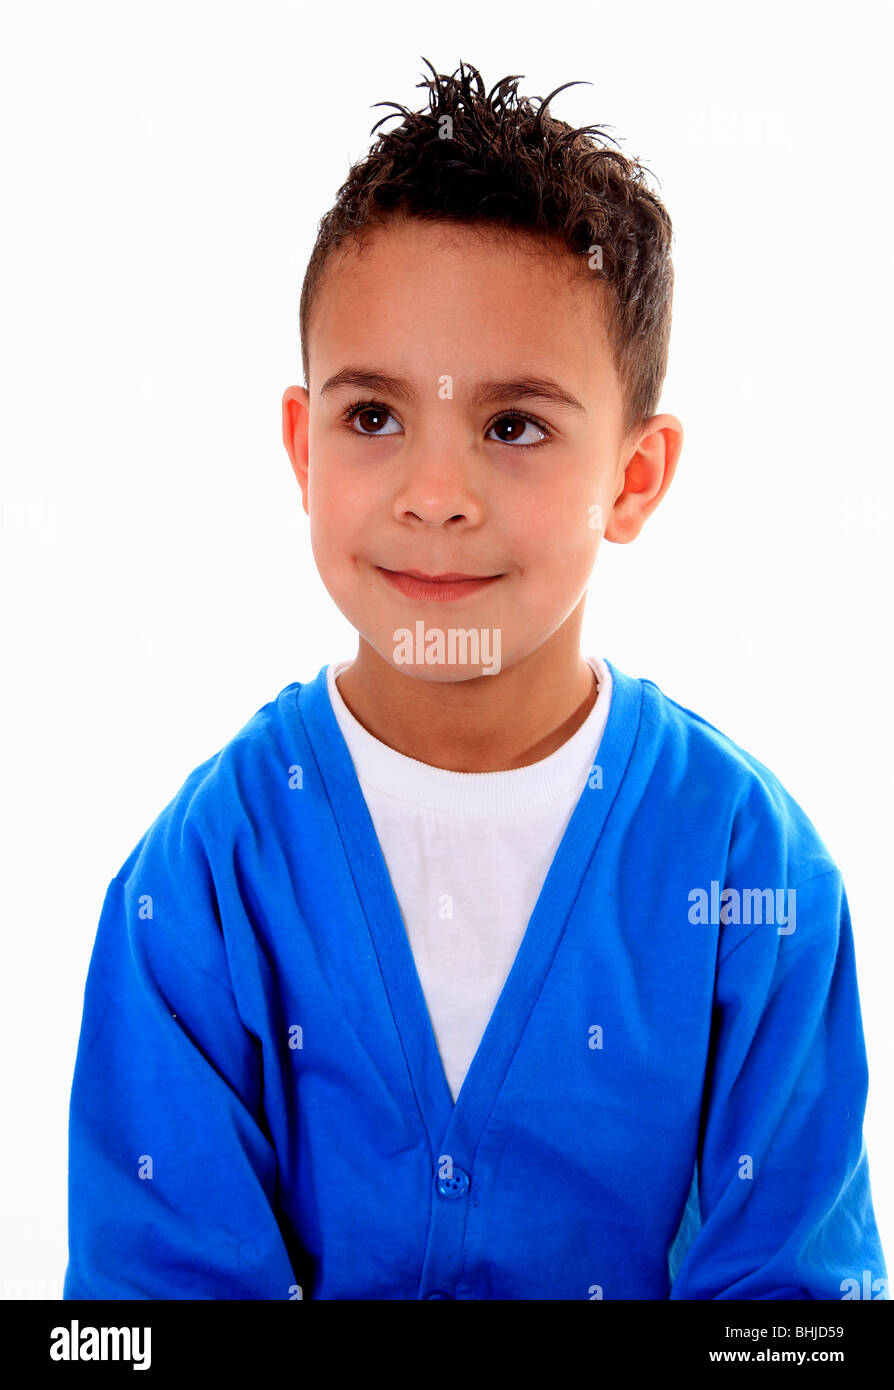 cute portrait of 6 year old boy Stock Photo